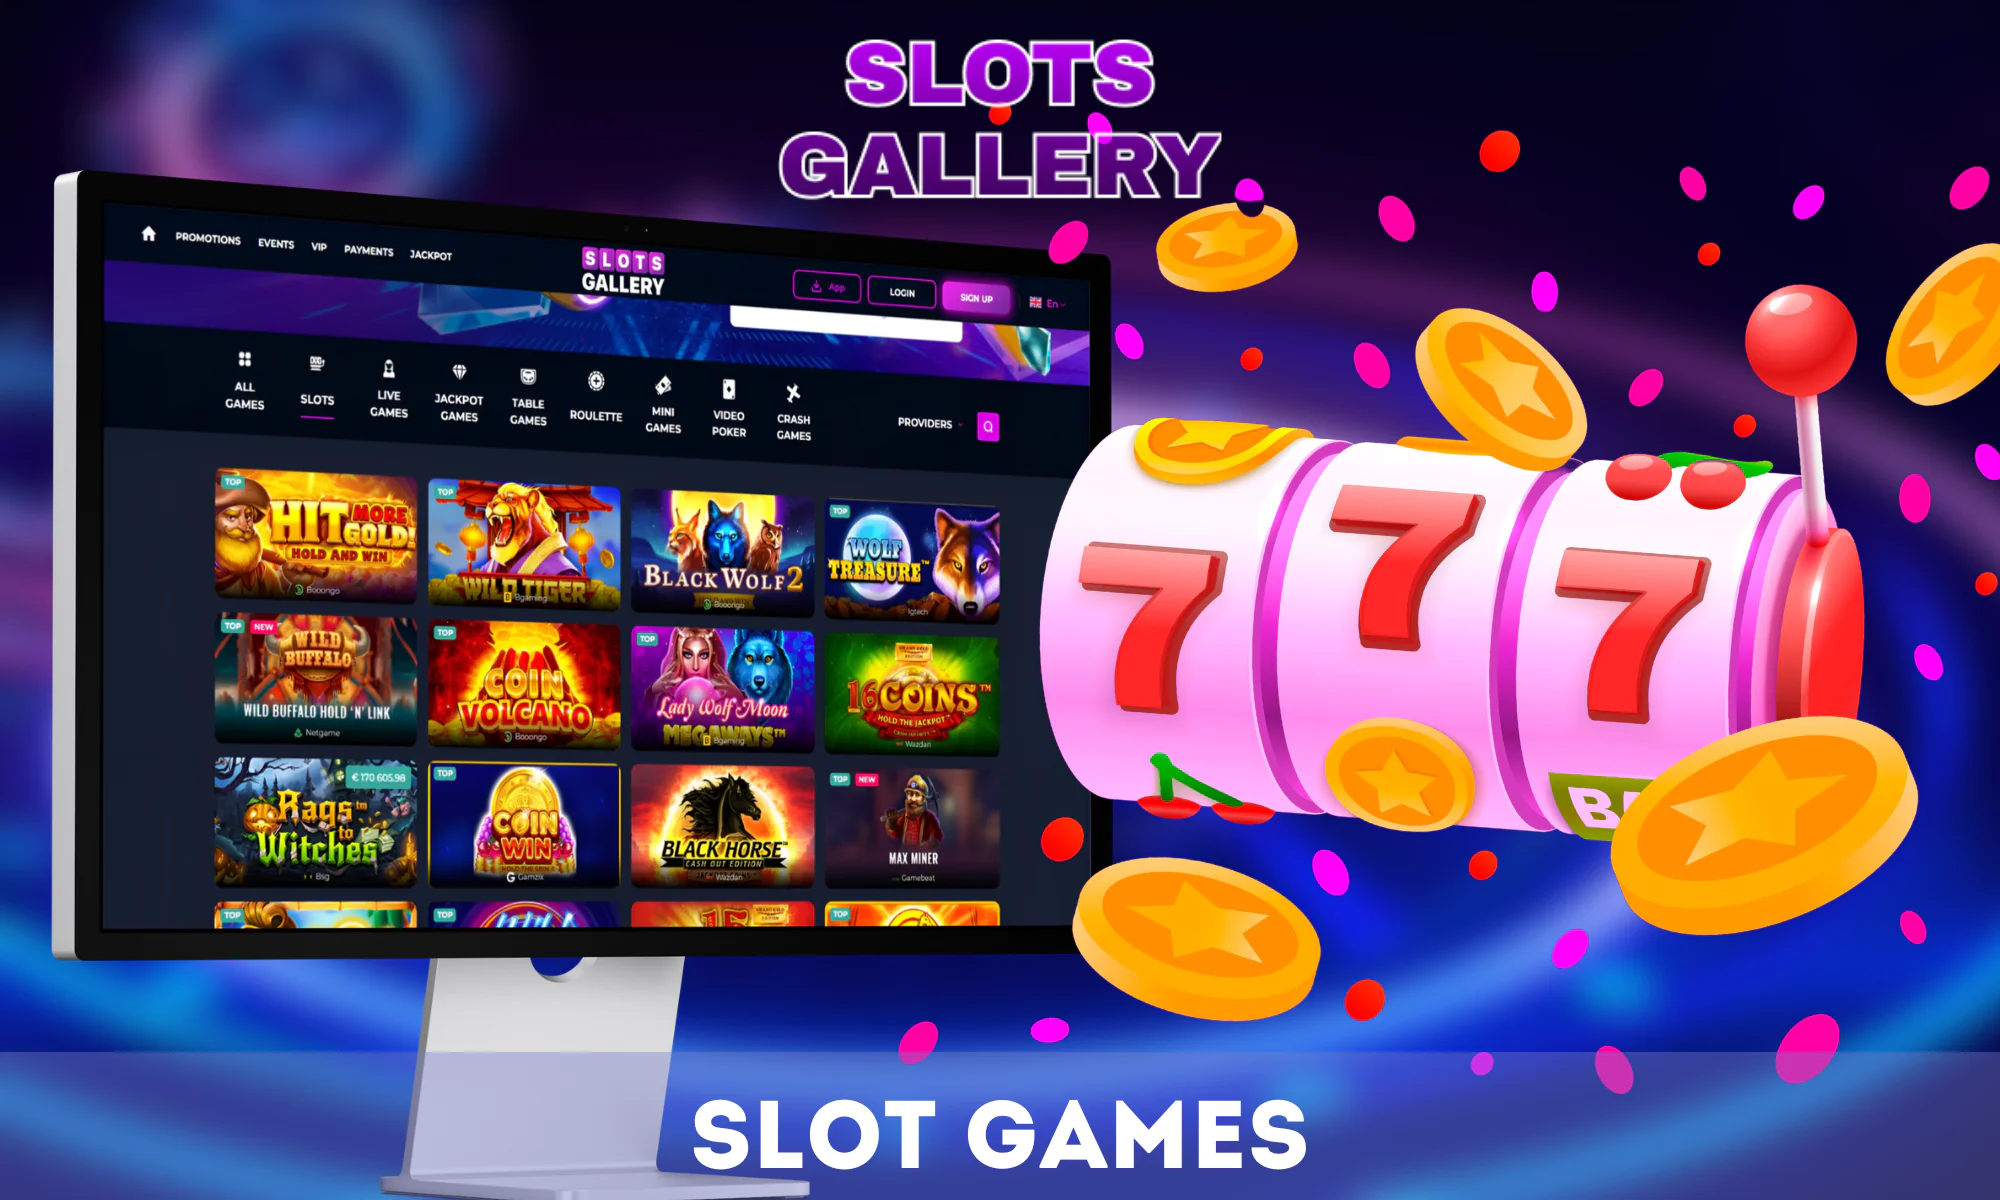 Slots Gallery has more than 5,000 games and a variety of options, from classic fruit machines to state-of-the-art video slots